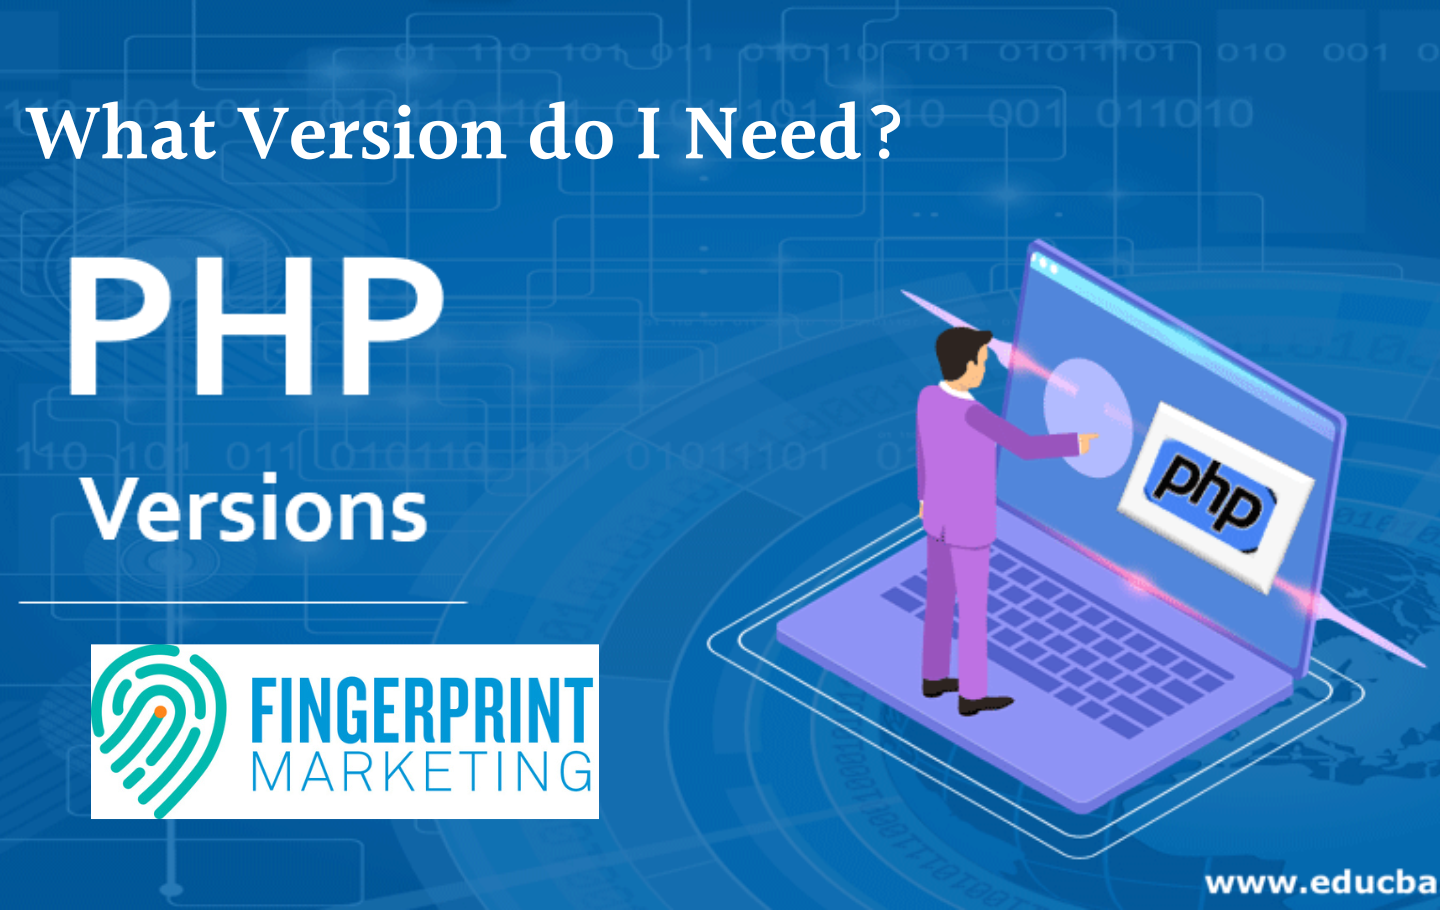 What Is the Lowest PHP Version I Need to Have for WordPress?